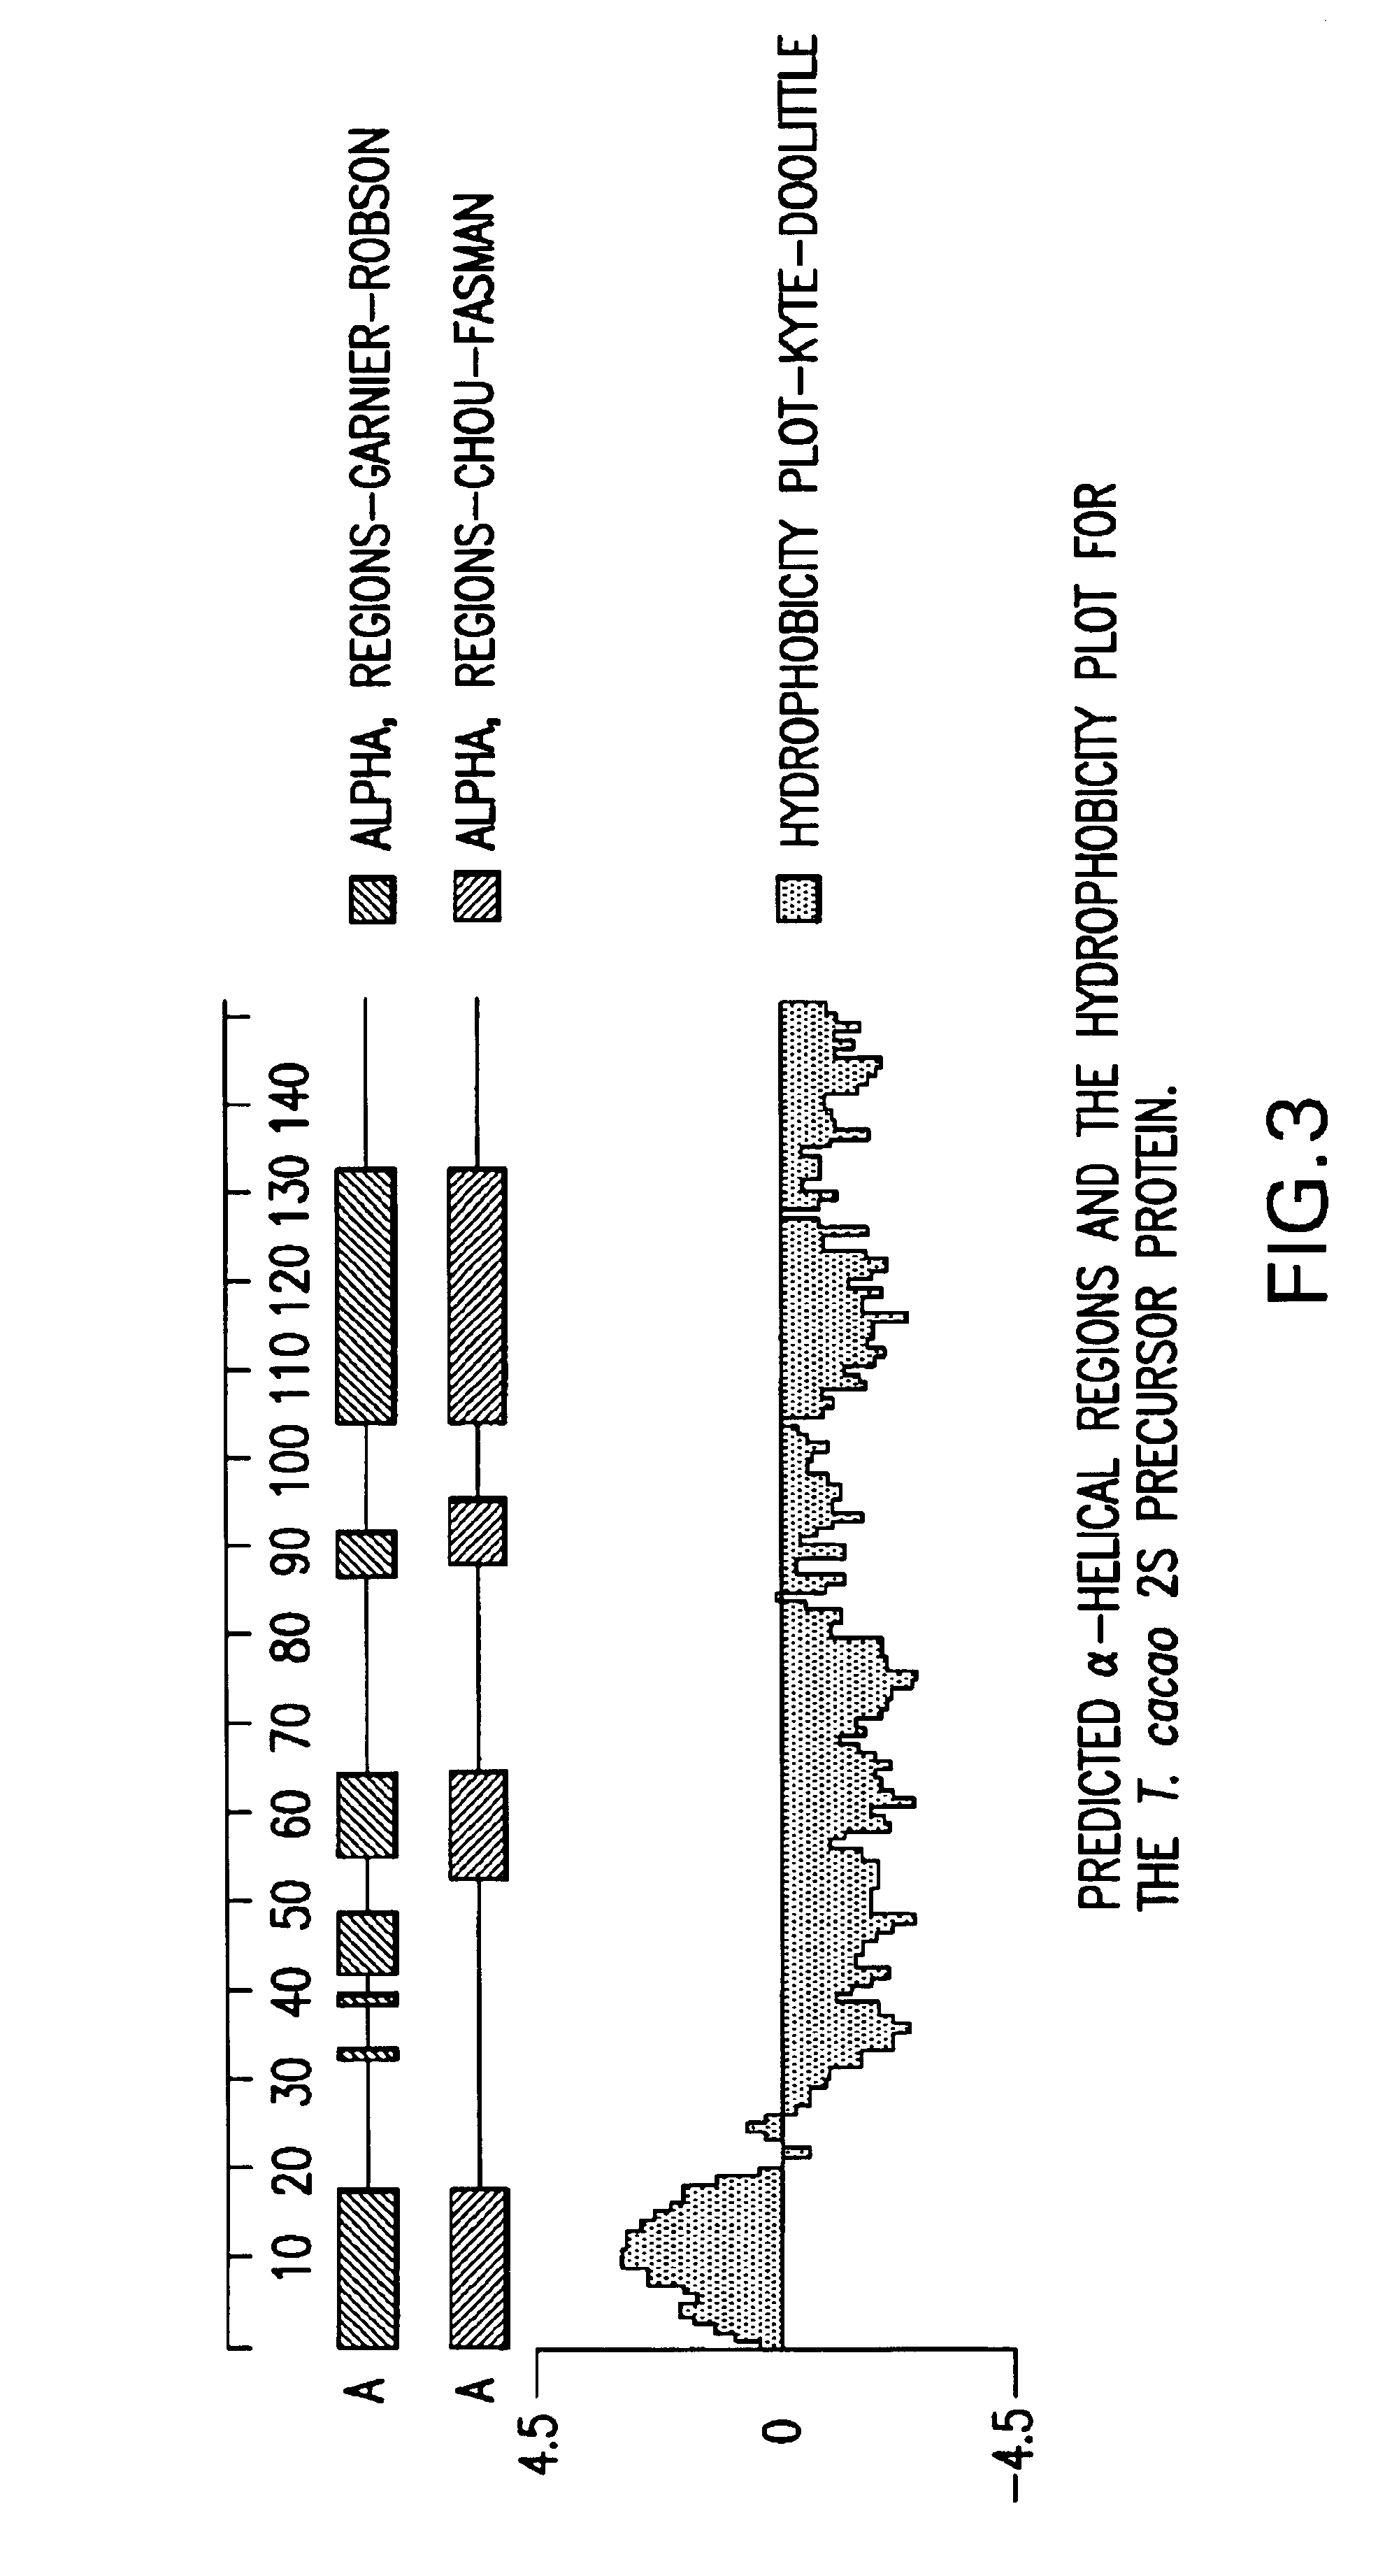 Cocoa albumin and its use in the production of cocoa and chocolate flavor